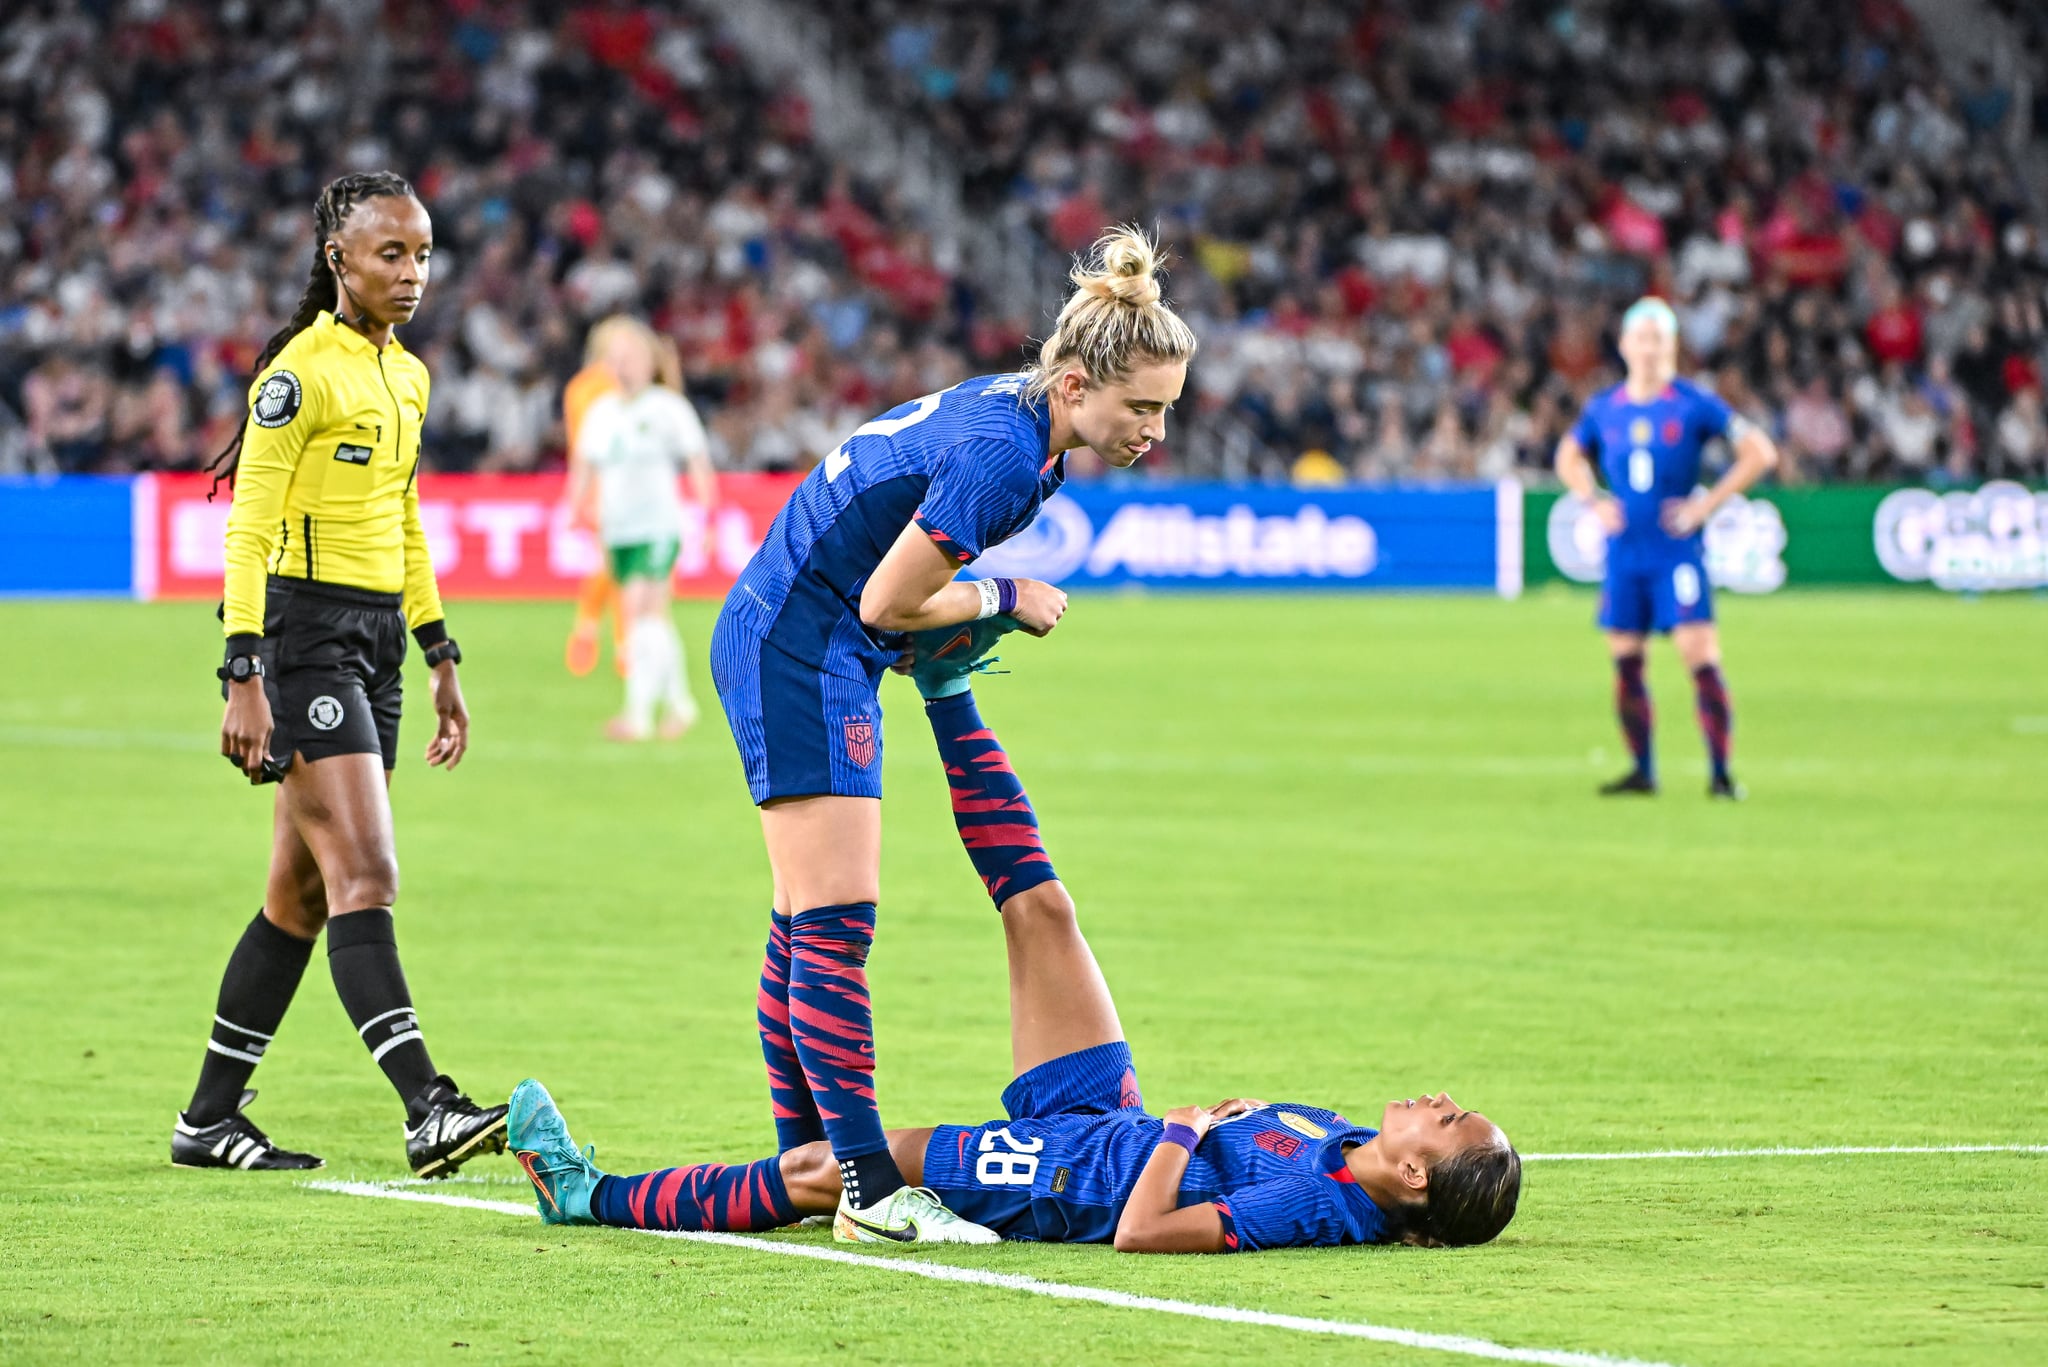 ST. LOUIS, MO - APRIL 11: U.S. Women's National Team midfielder Kristie Mewis (22) helps U.S. Women's National Team forward Alyssa Thompson (28) work out a cramp during an international friendly game between the Republic of Ireland Woman's National Team and the United States of America Woman's National Team on April 11, 2023, at CITYPARK Stadium in St. Louis City, MO. (Photo by Rick Ulreich/Icon Sportswire via Getty Images)